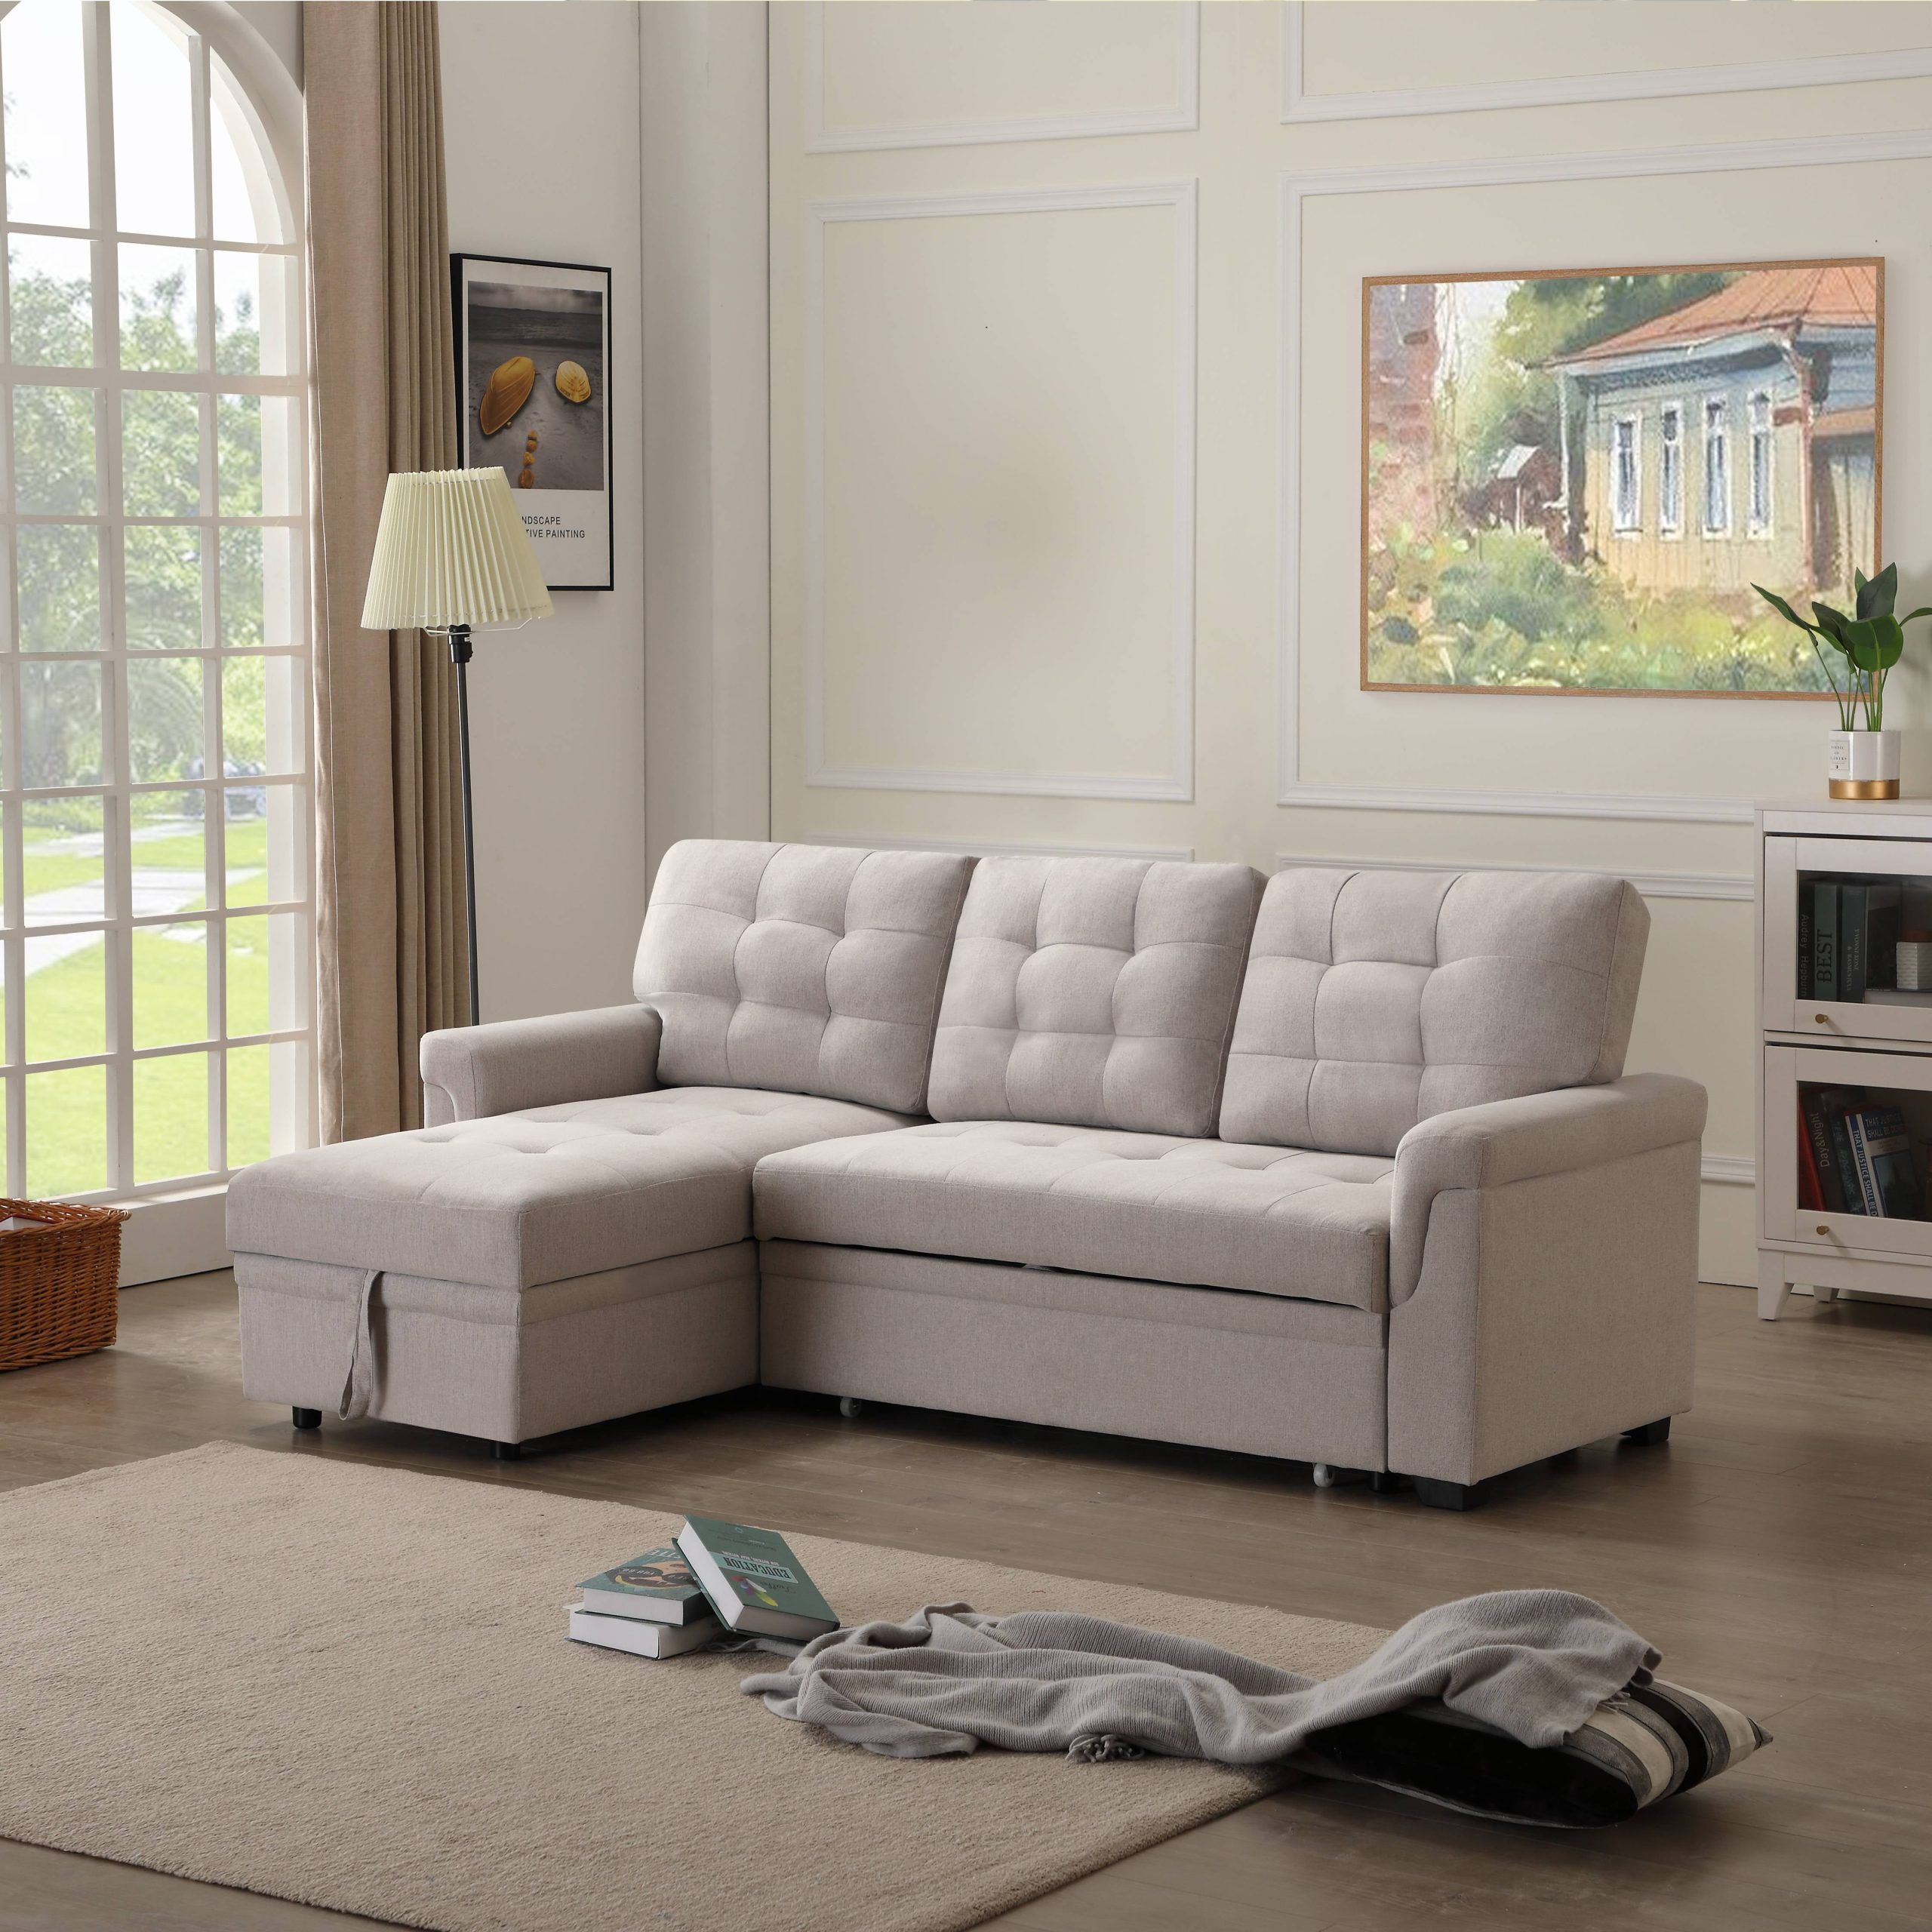 L Shaped Sectional Sofa Bed With Reversible Chaise, 86"w Modern 3 Seat Intended For Beige L Shaped Sectional Sofas (Gallery 6 of 20)